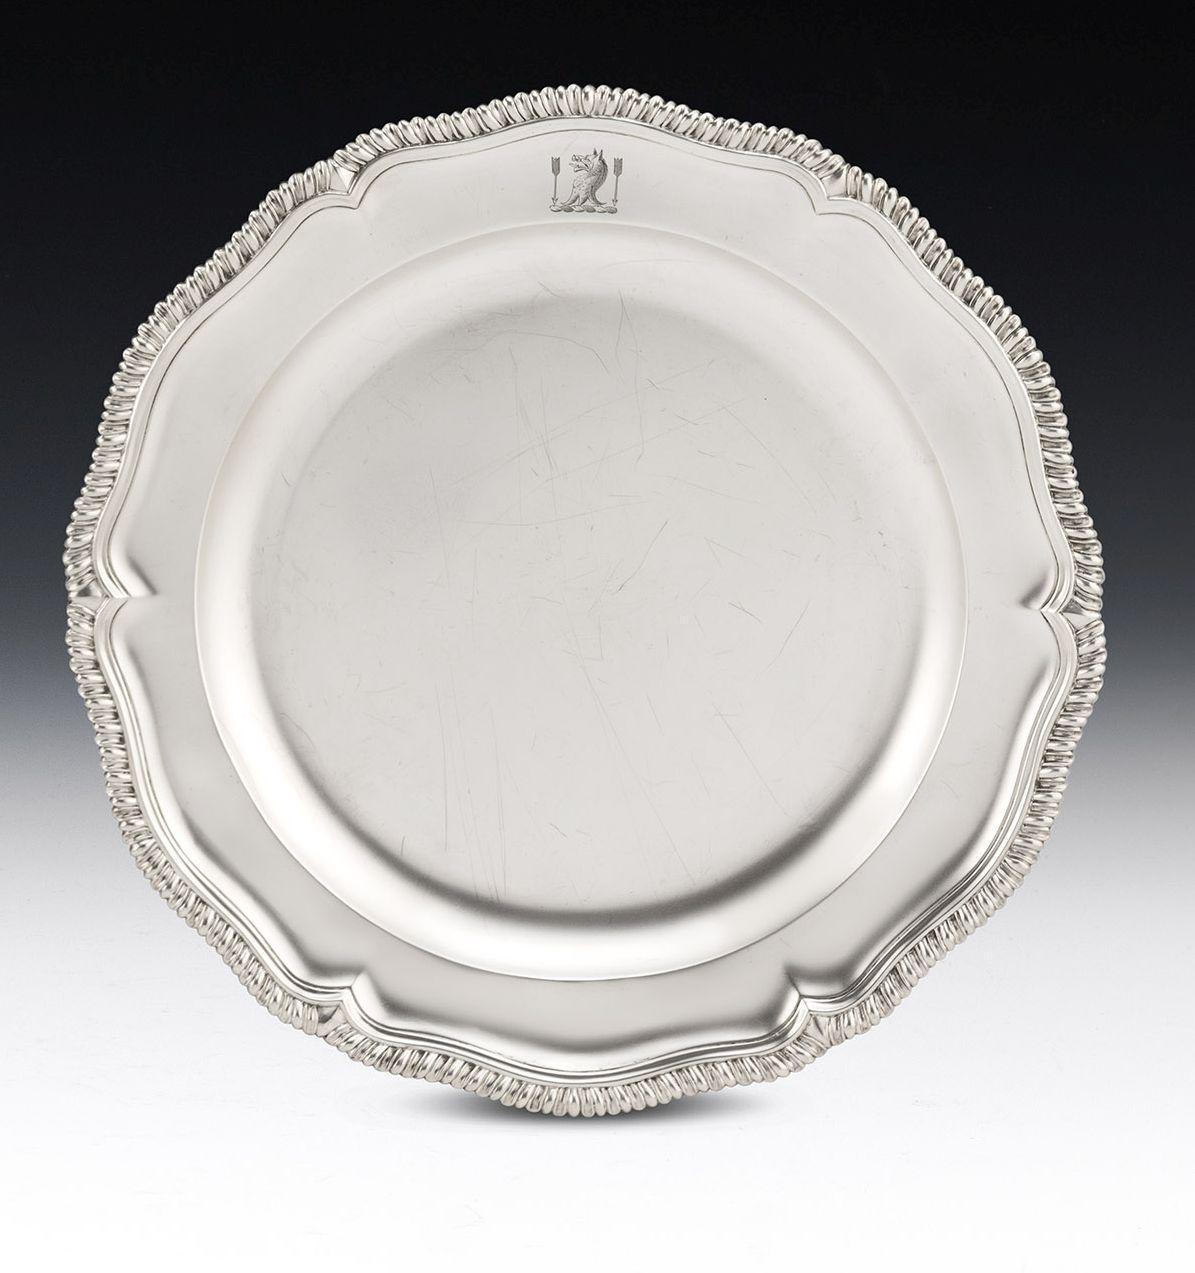 An Extremely Fine Pair of George II Second Course Dishes Made in London in 1754 by John Jacobs

The Dishes were made in London in 1754 by the very fine silversmith, Jean, also known as John Jacobs. The Dishes have a circular bowl and a raised